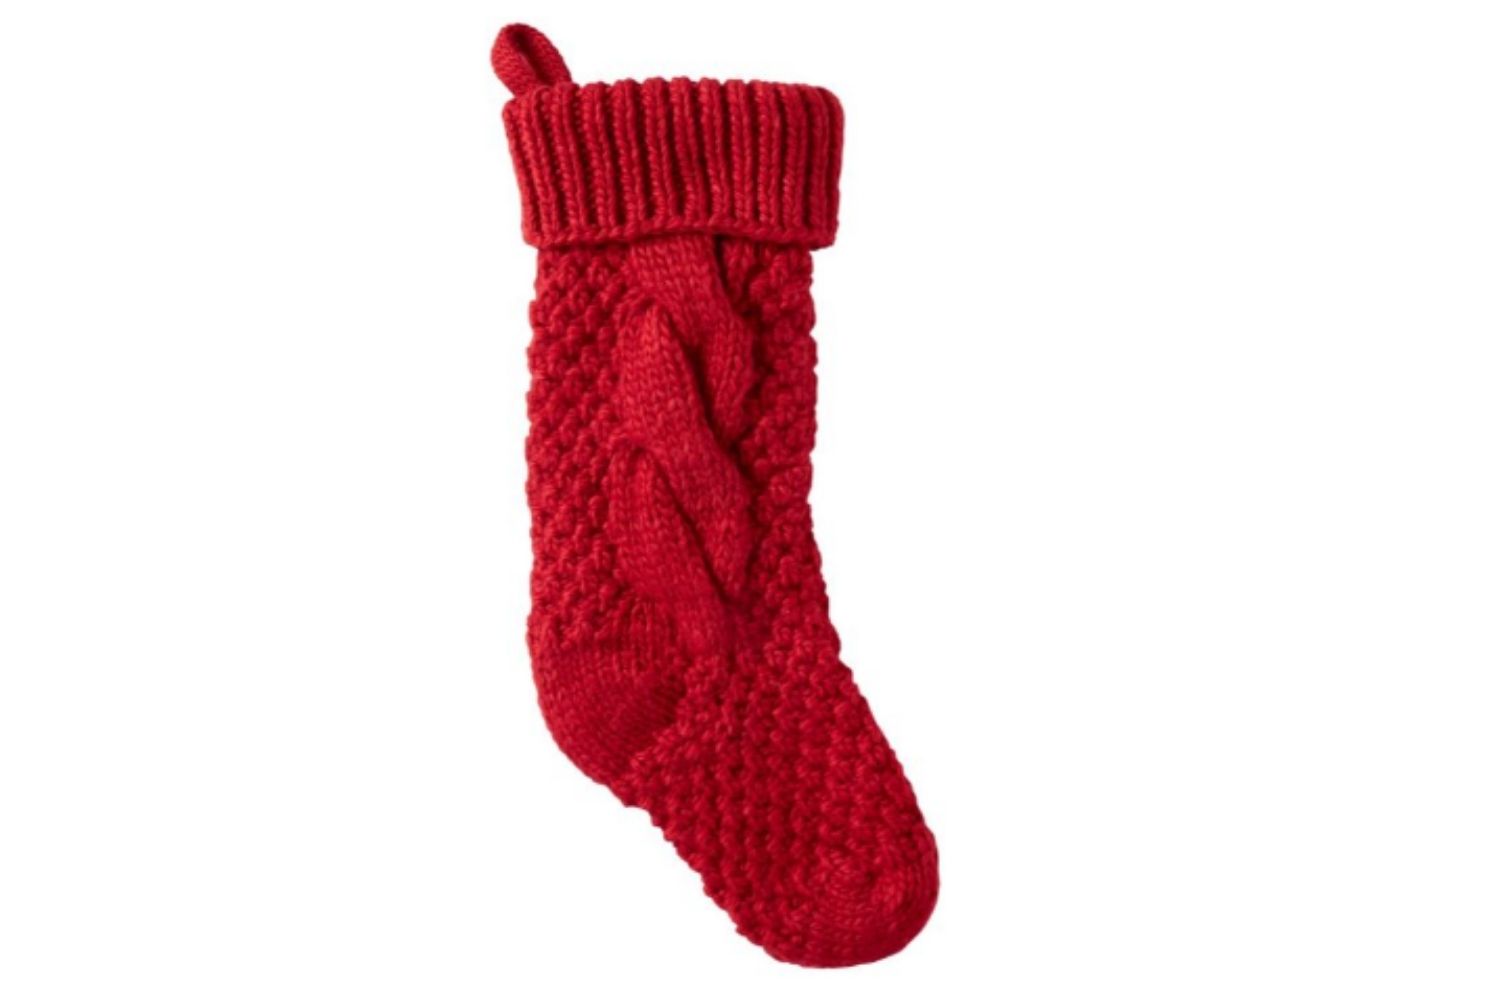 The Best Christmas Stockings Option: L.L. Bean Chunky Knit Christmas Stocking